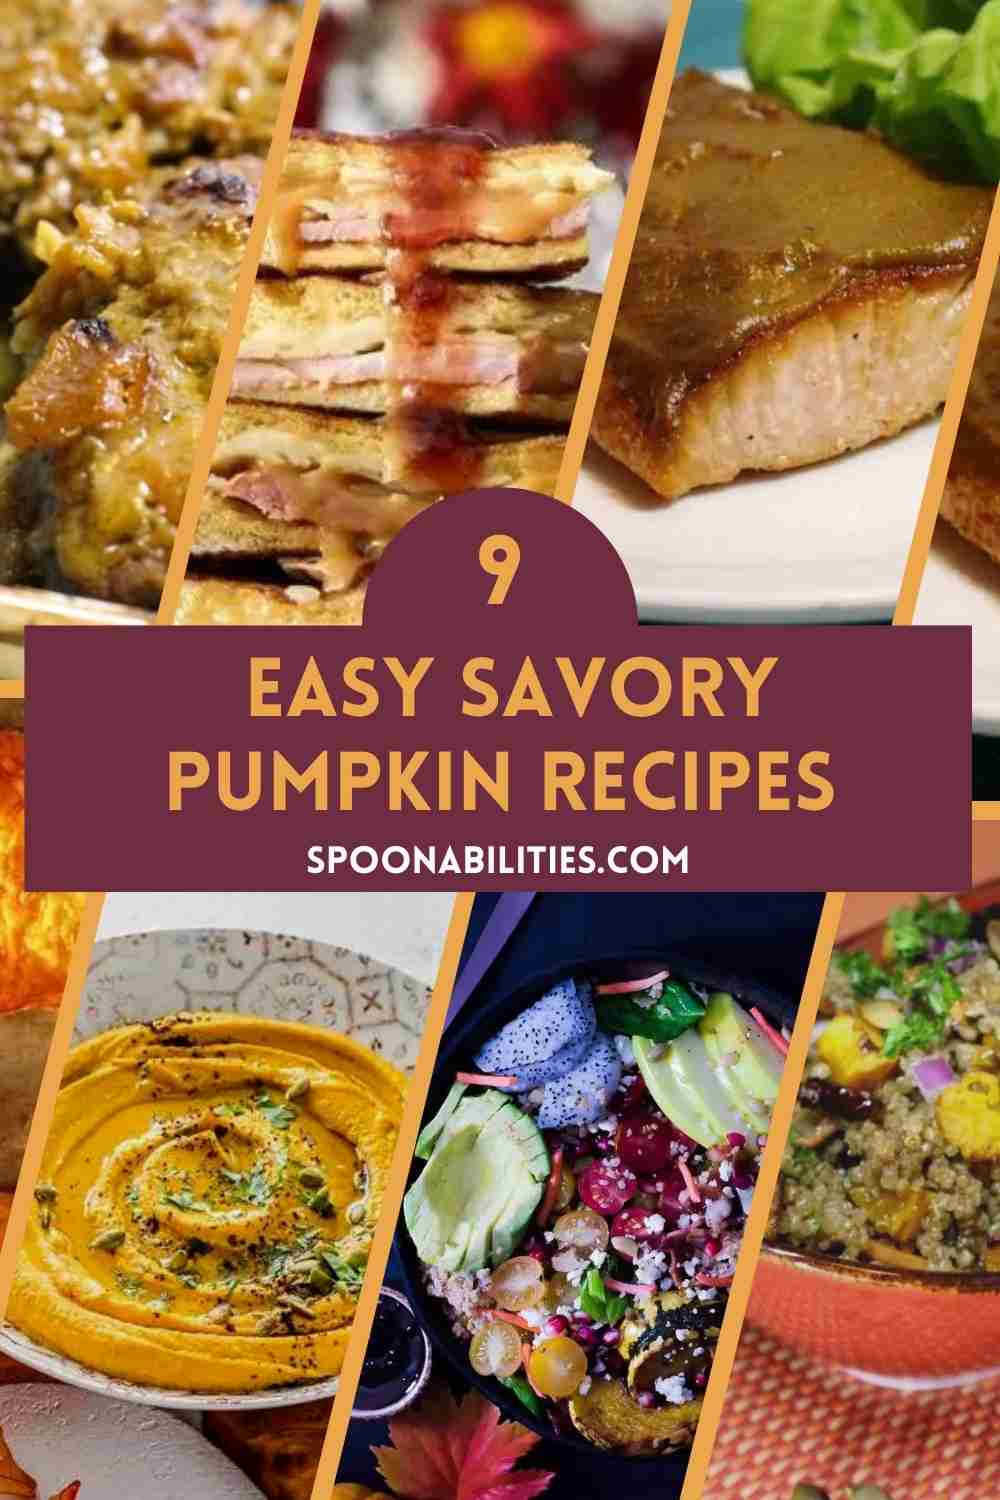 9 Easy Savory Pumpkin Recipes you will want to try from Spoonabilities.com #savory #recipes #pumpkin